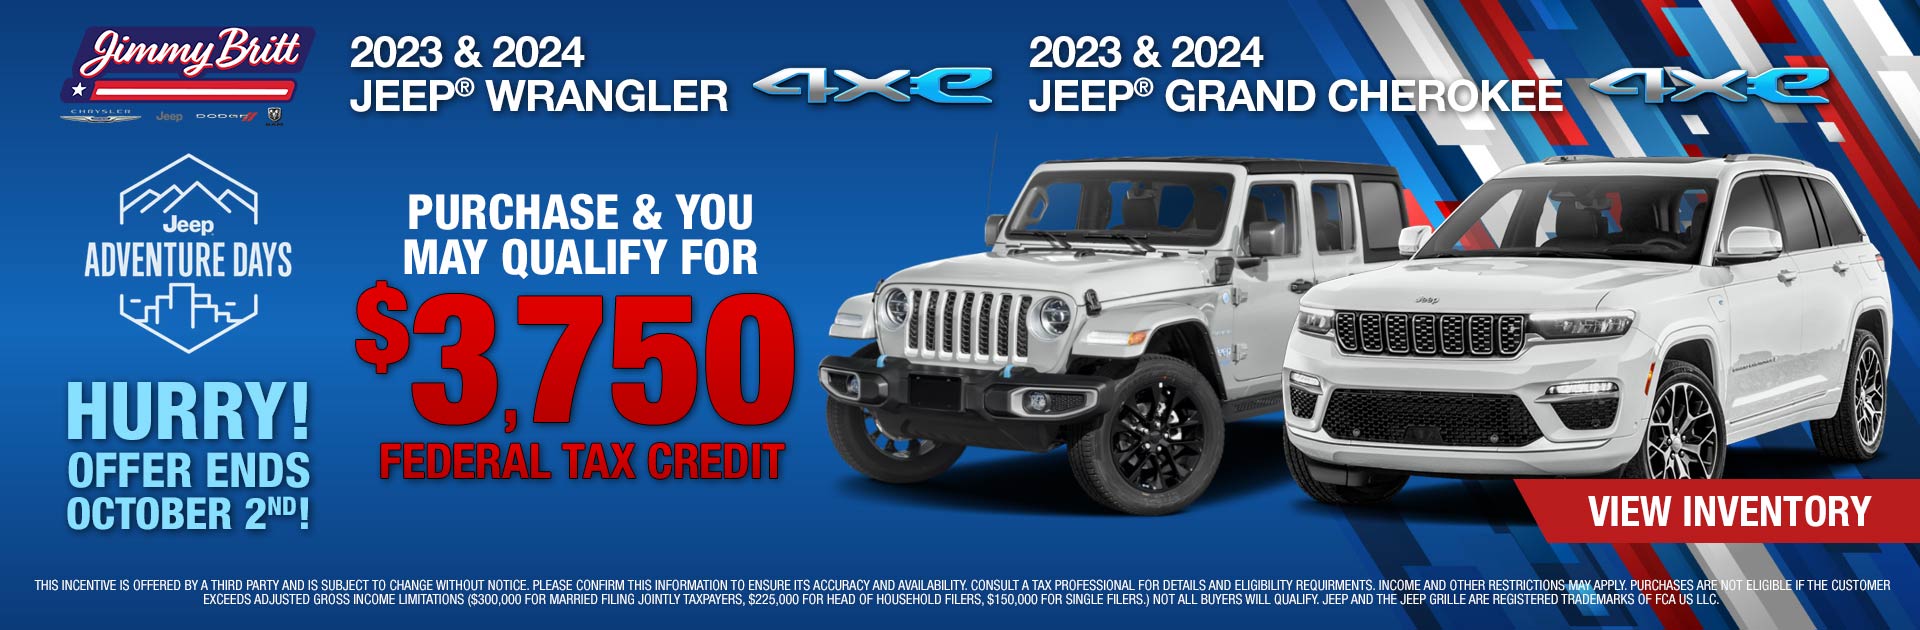 Select 2023 & 2024 Jeep Wrangler Models: Purchase and You may qualify for $3750 Federal Tax Credit!